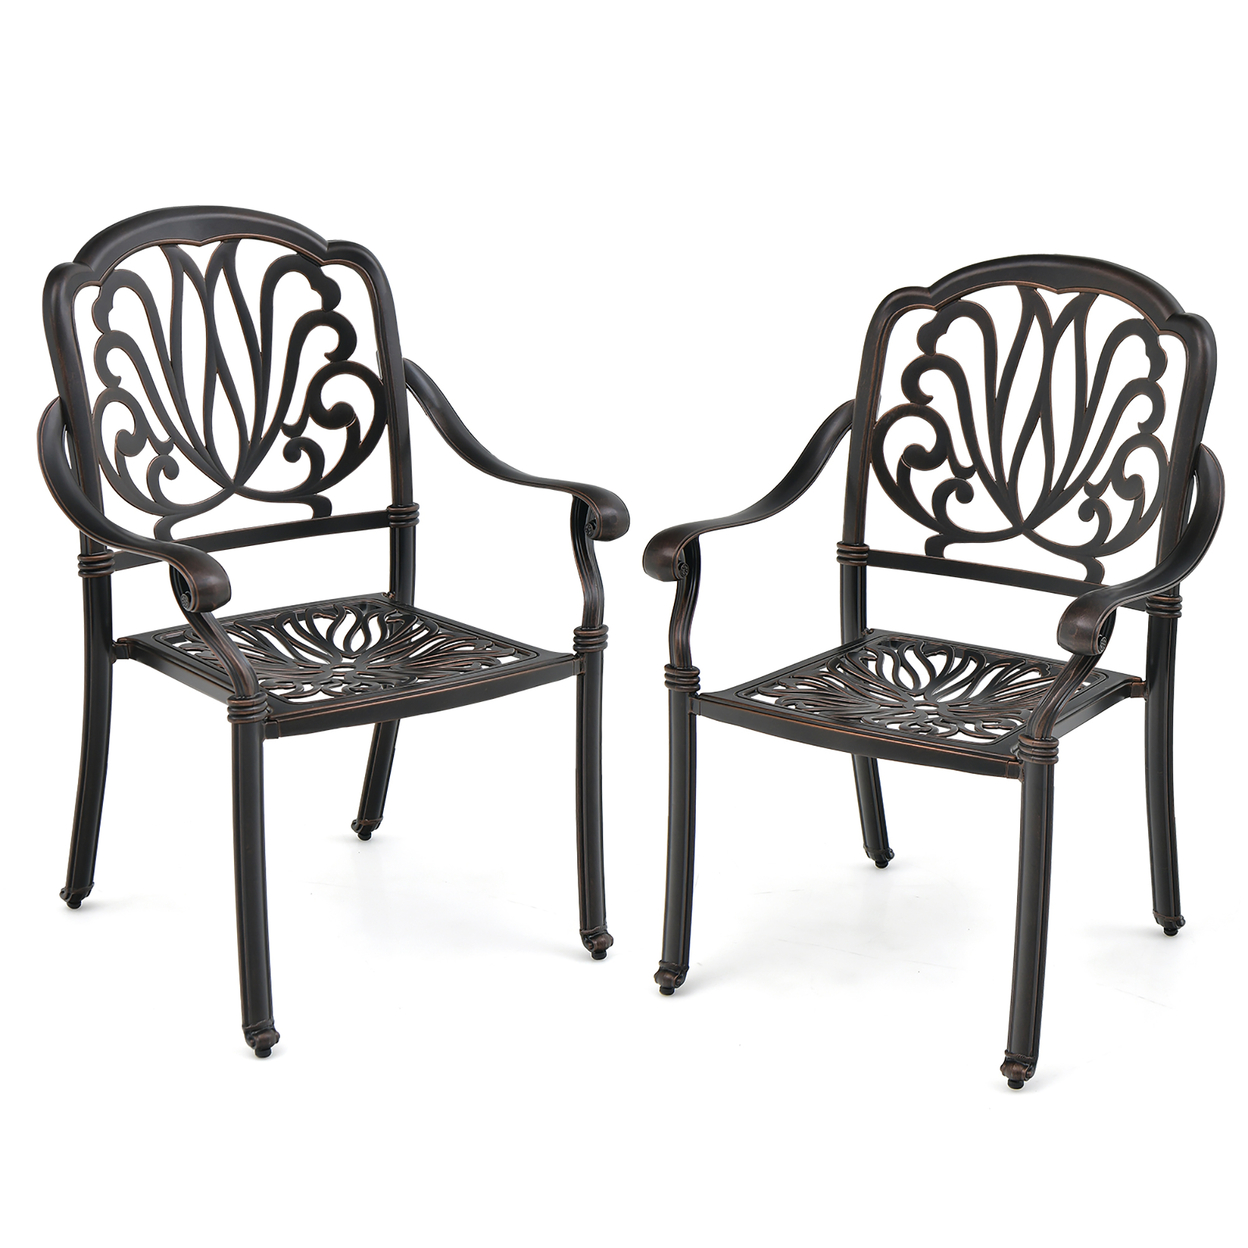 2 Pieces Cast Aluminum Chairs Set Of 2 Stackable Patio Dining Chairs W/ Armrests